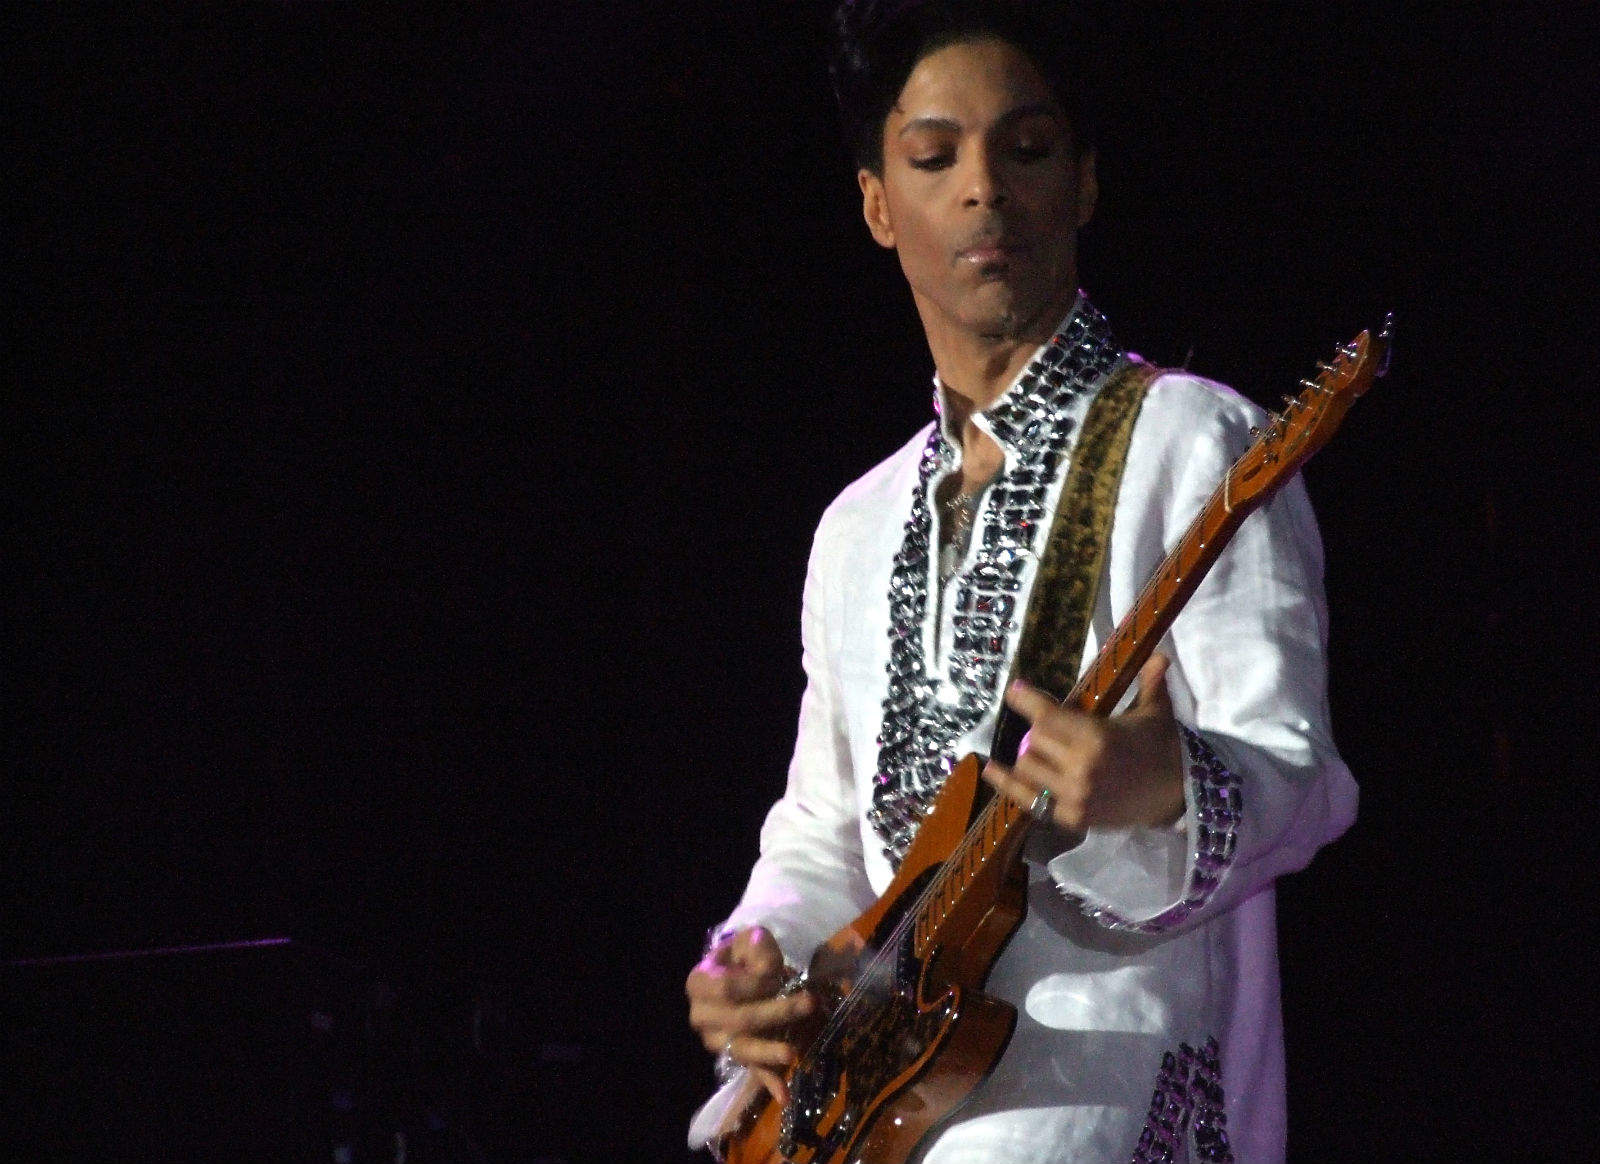 Prince is dead, but his music lives on. Just not on Apple Music.